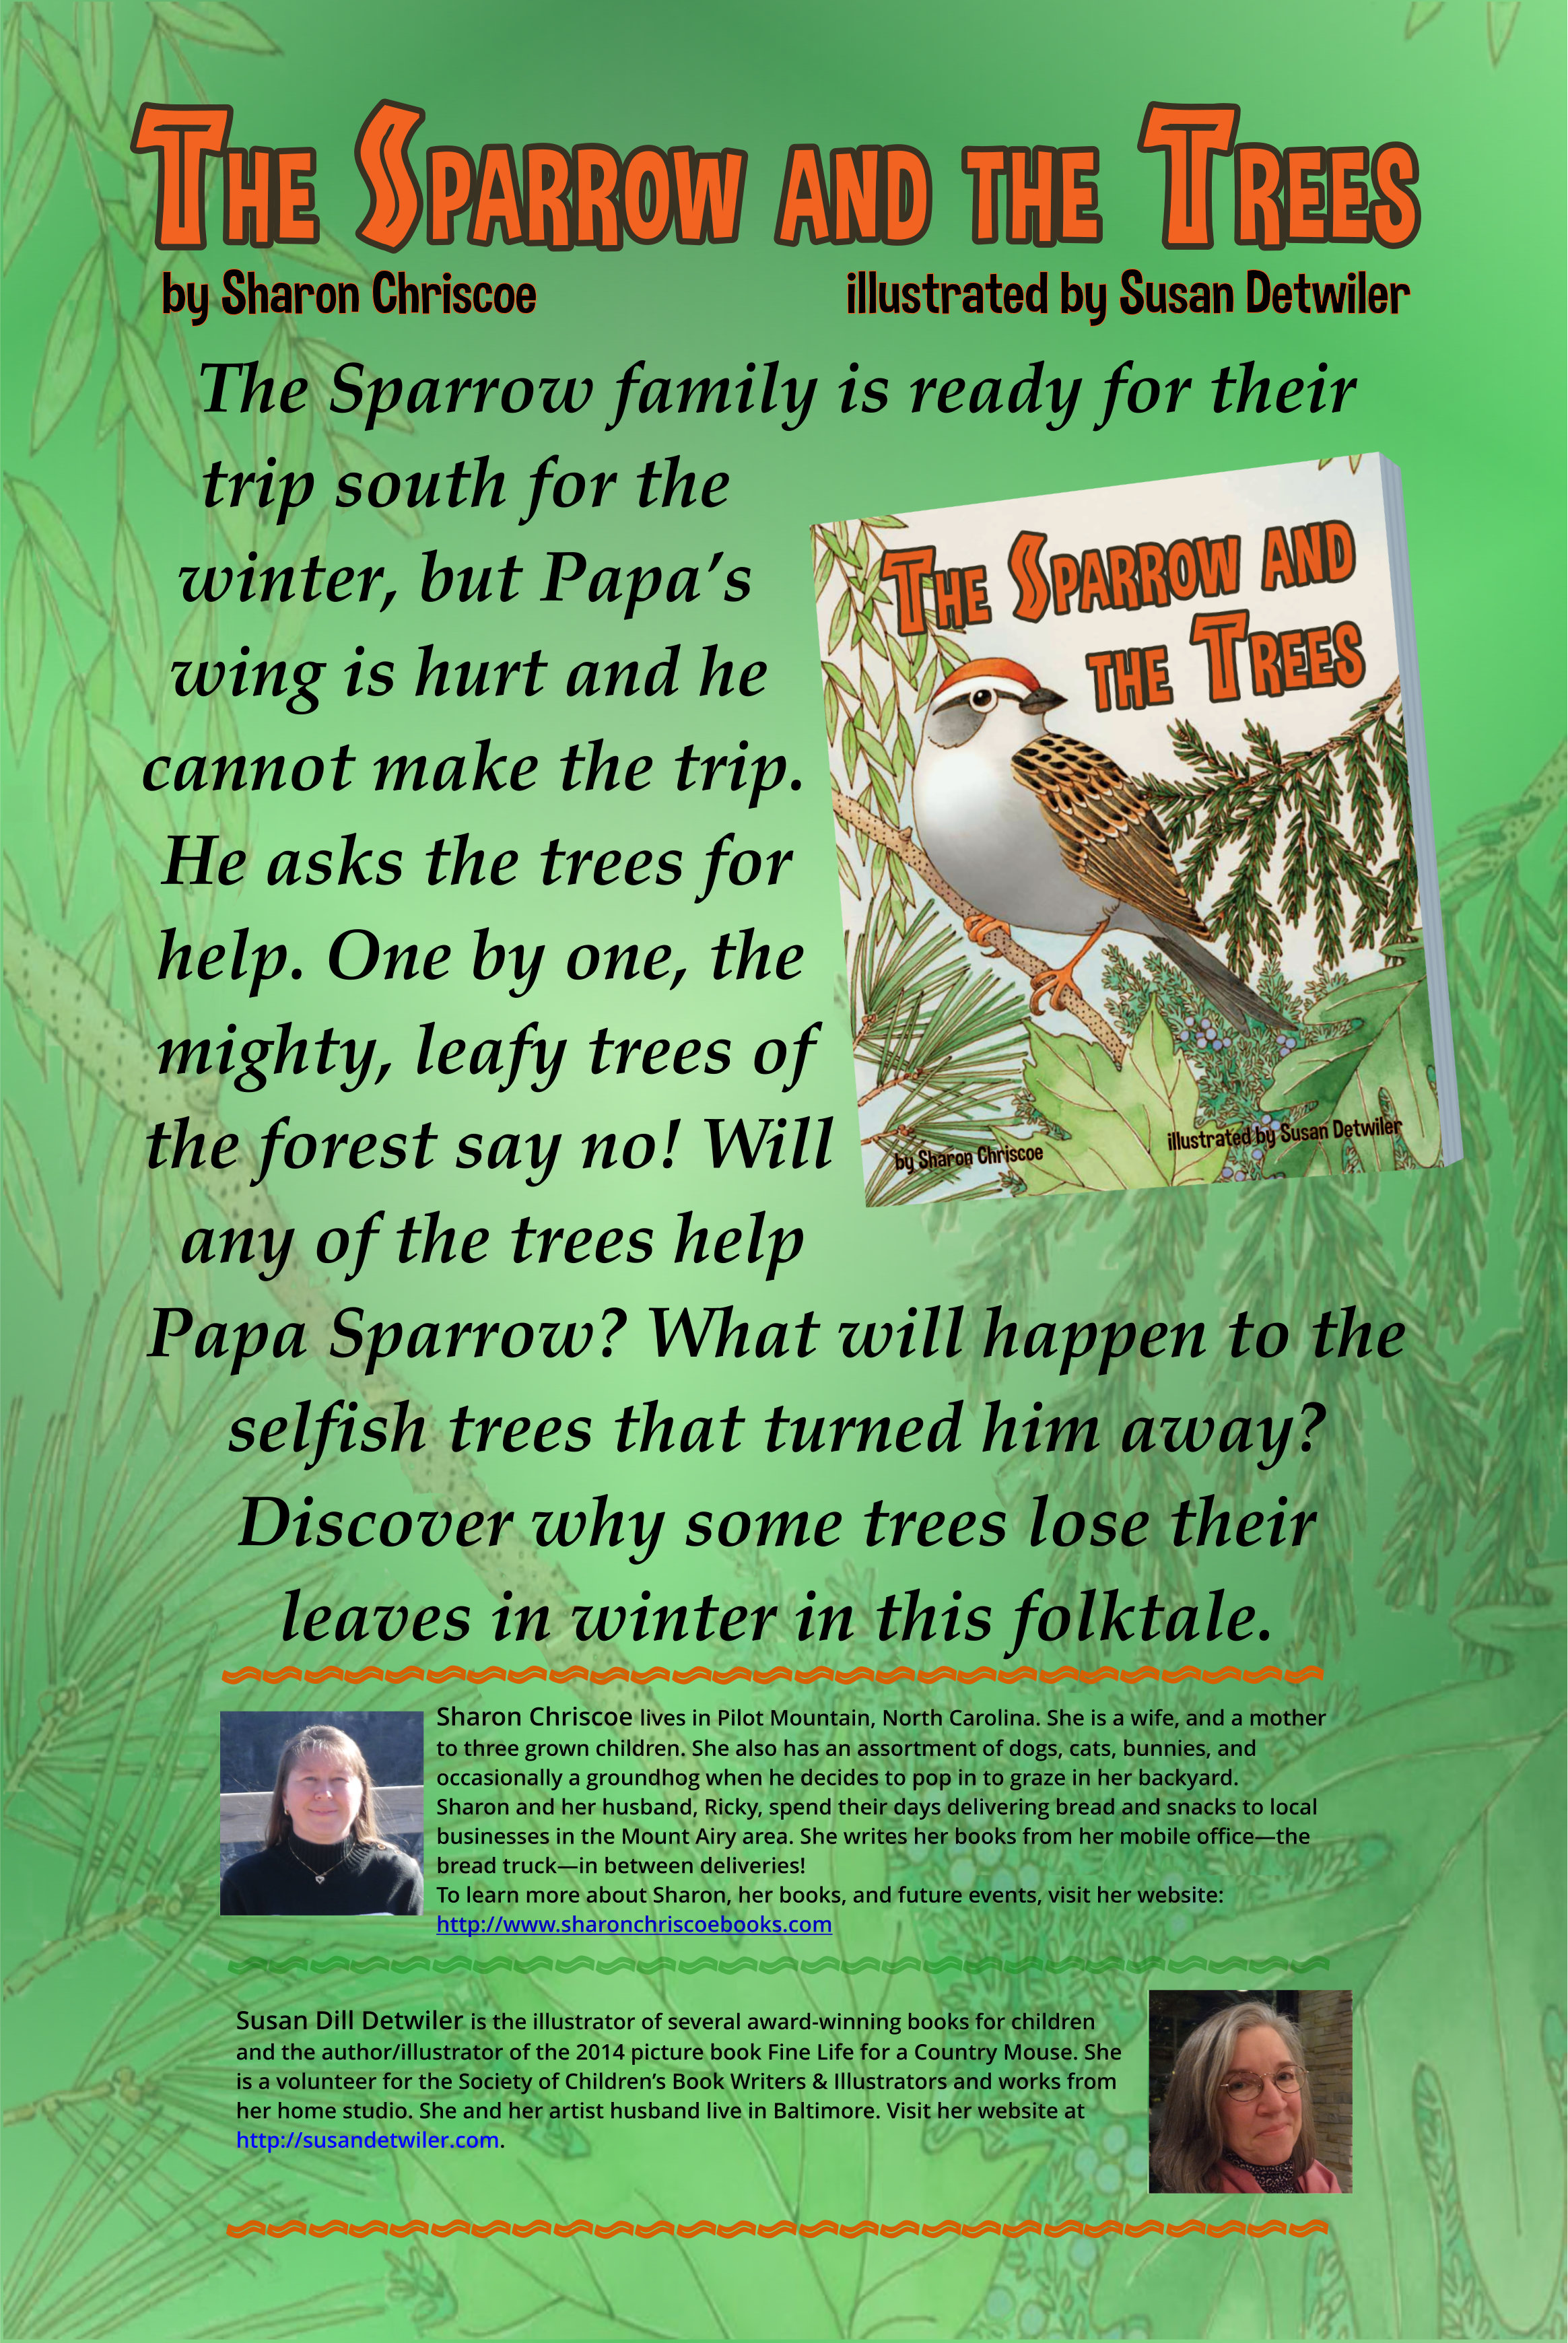 green background with THE SPARROW AND THE TREES in orange type, the book cover for the picture book THE SPARROW AND THE TREES, and aa synopsis of the book